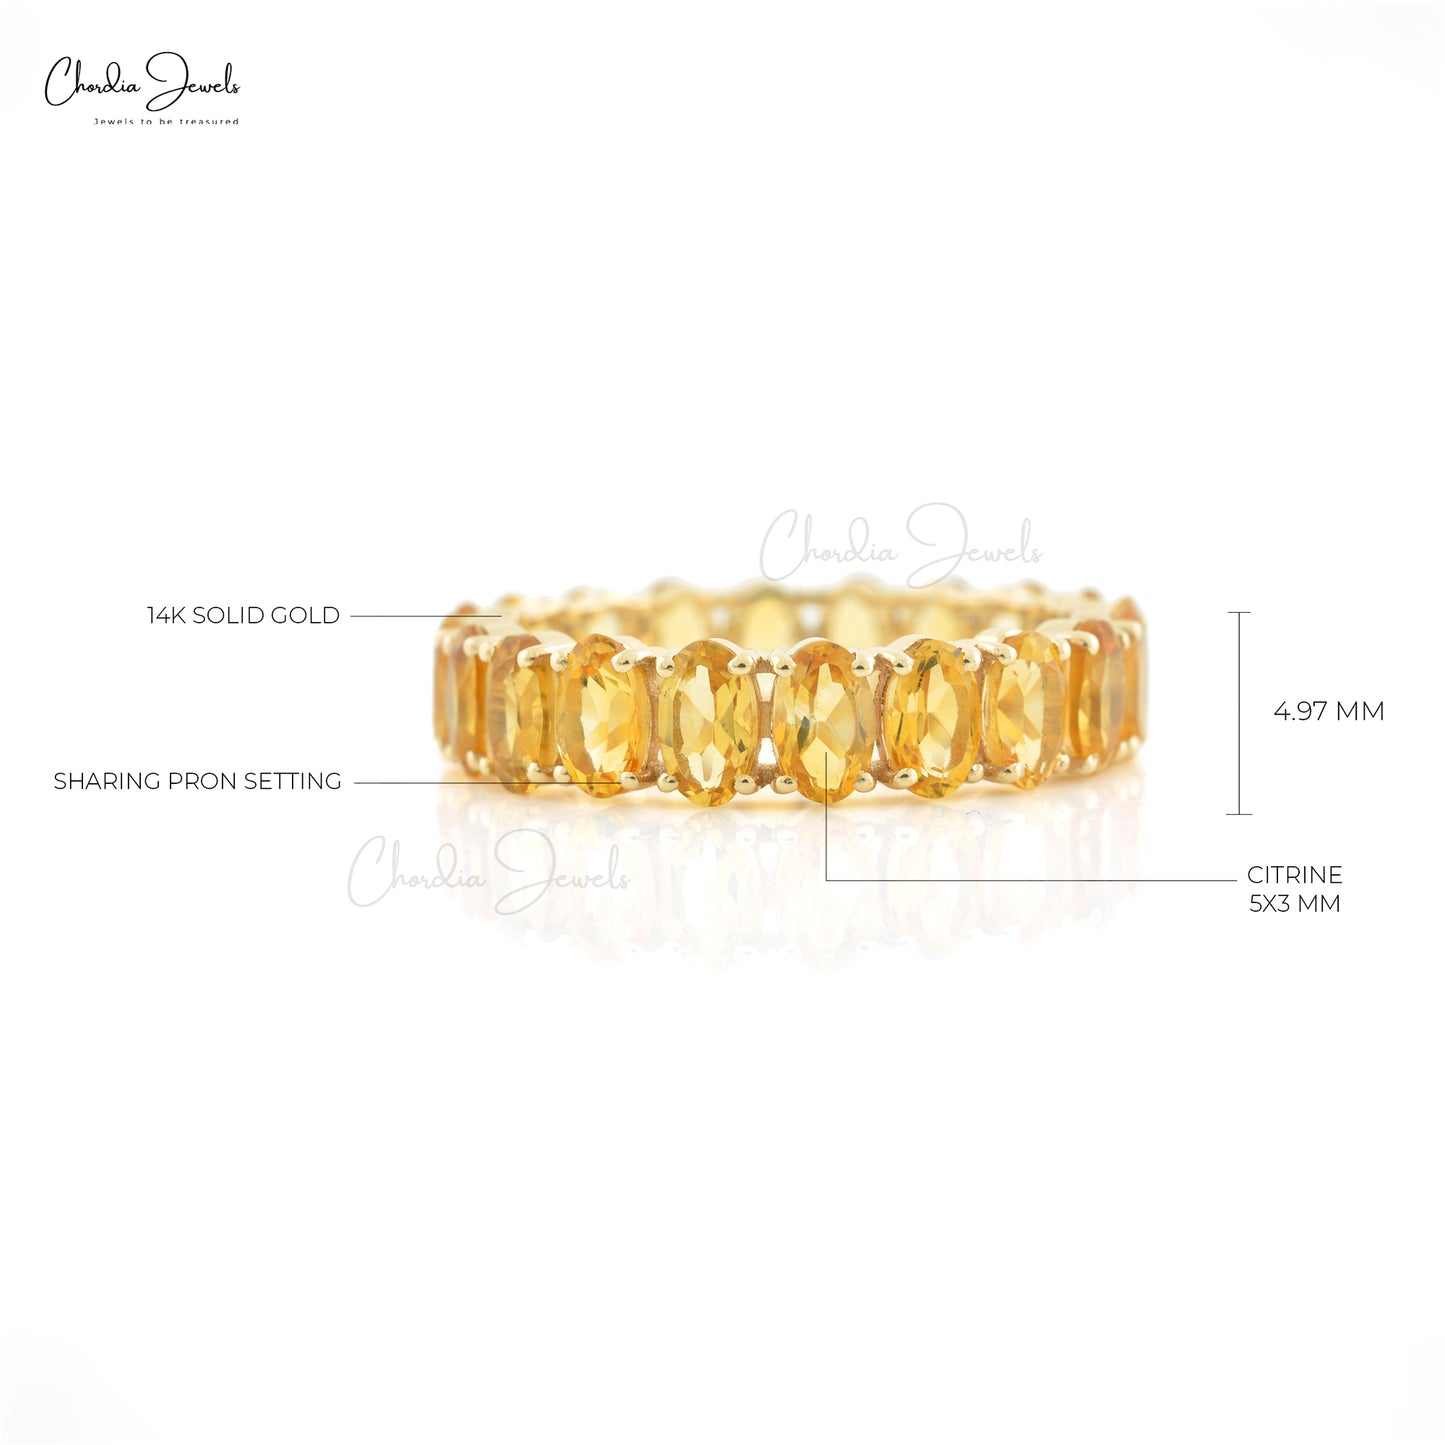 Natural Citrine Eternity Band 14k Solid Yellow Gold Ring Size US-6.5 5x3mm Oval Cut Gemstone Ring For November Birthstone